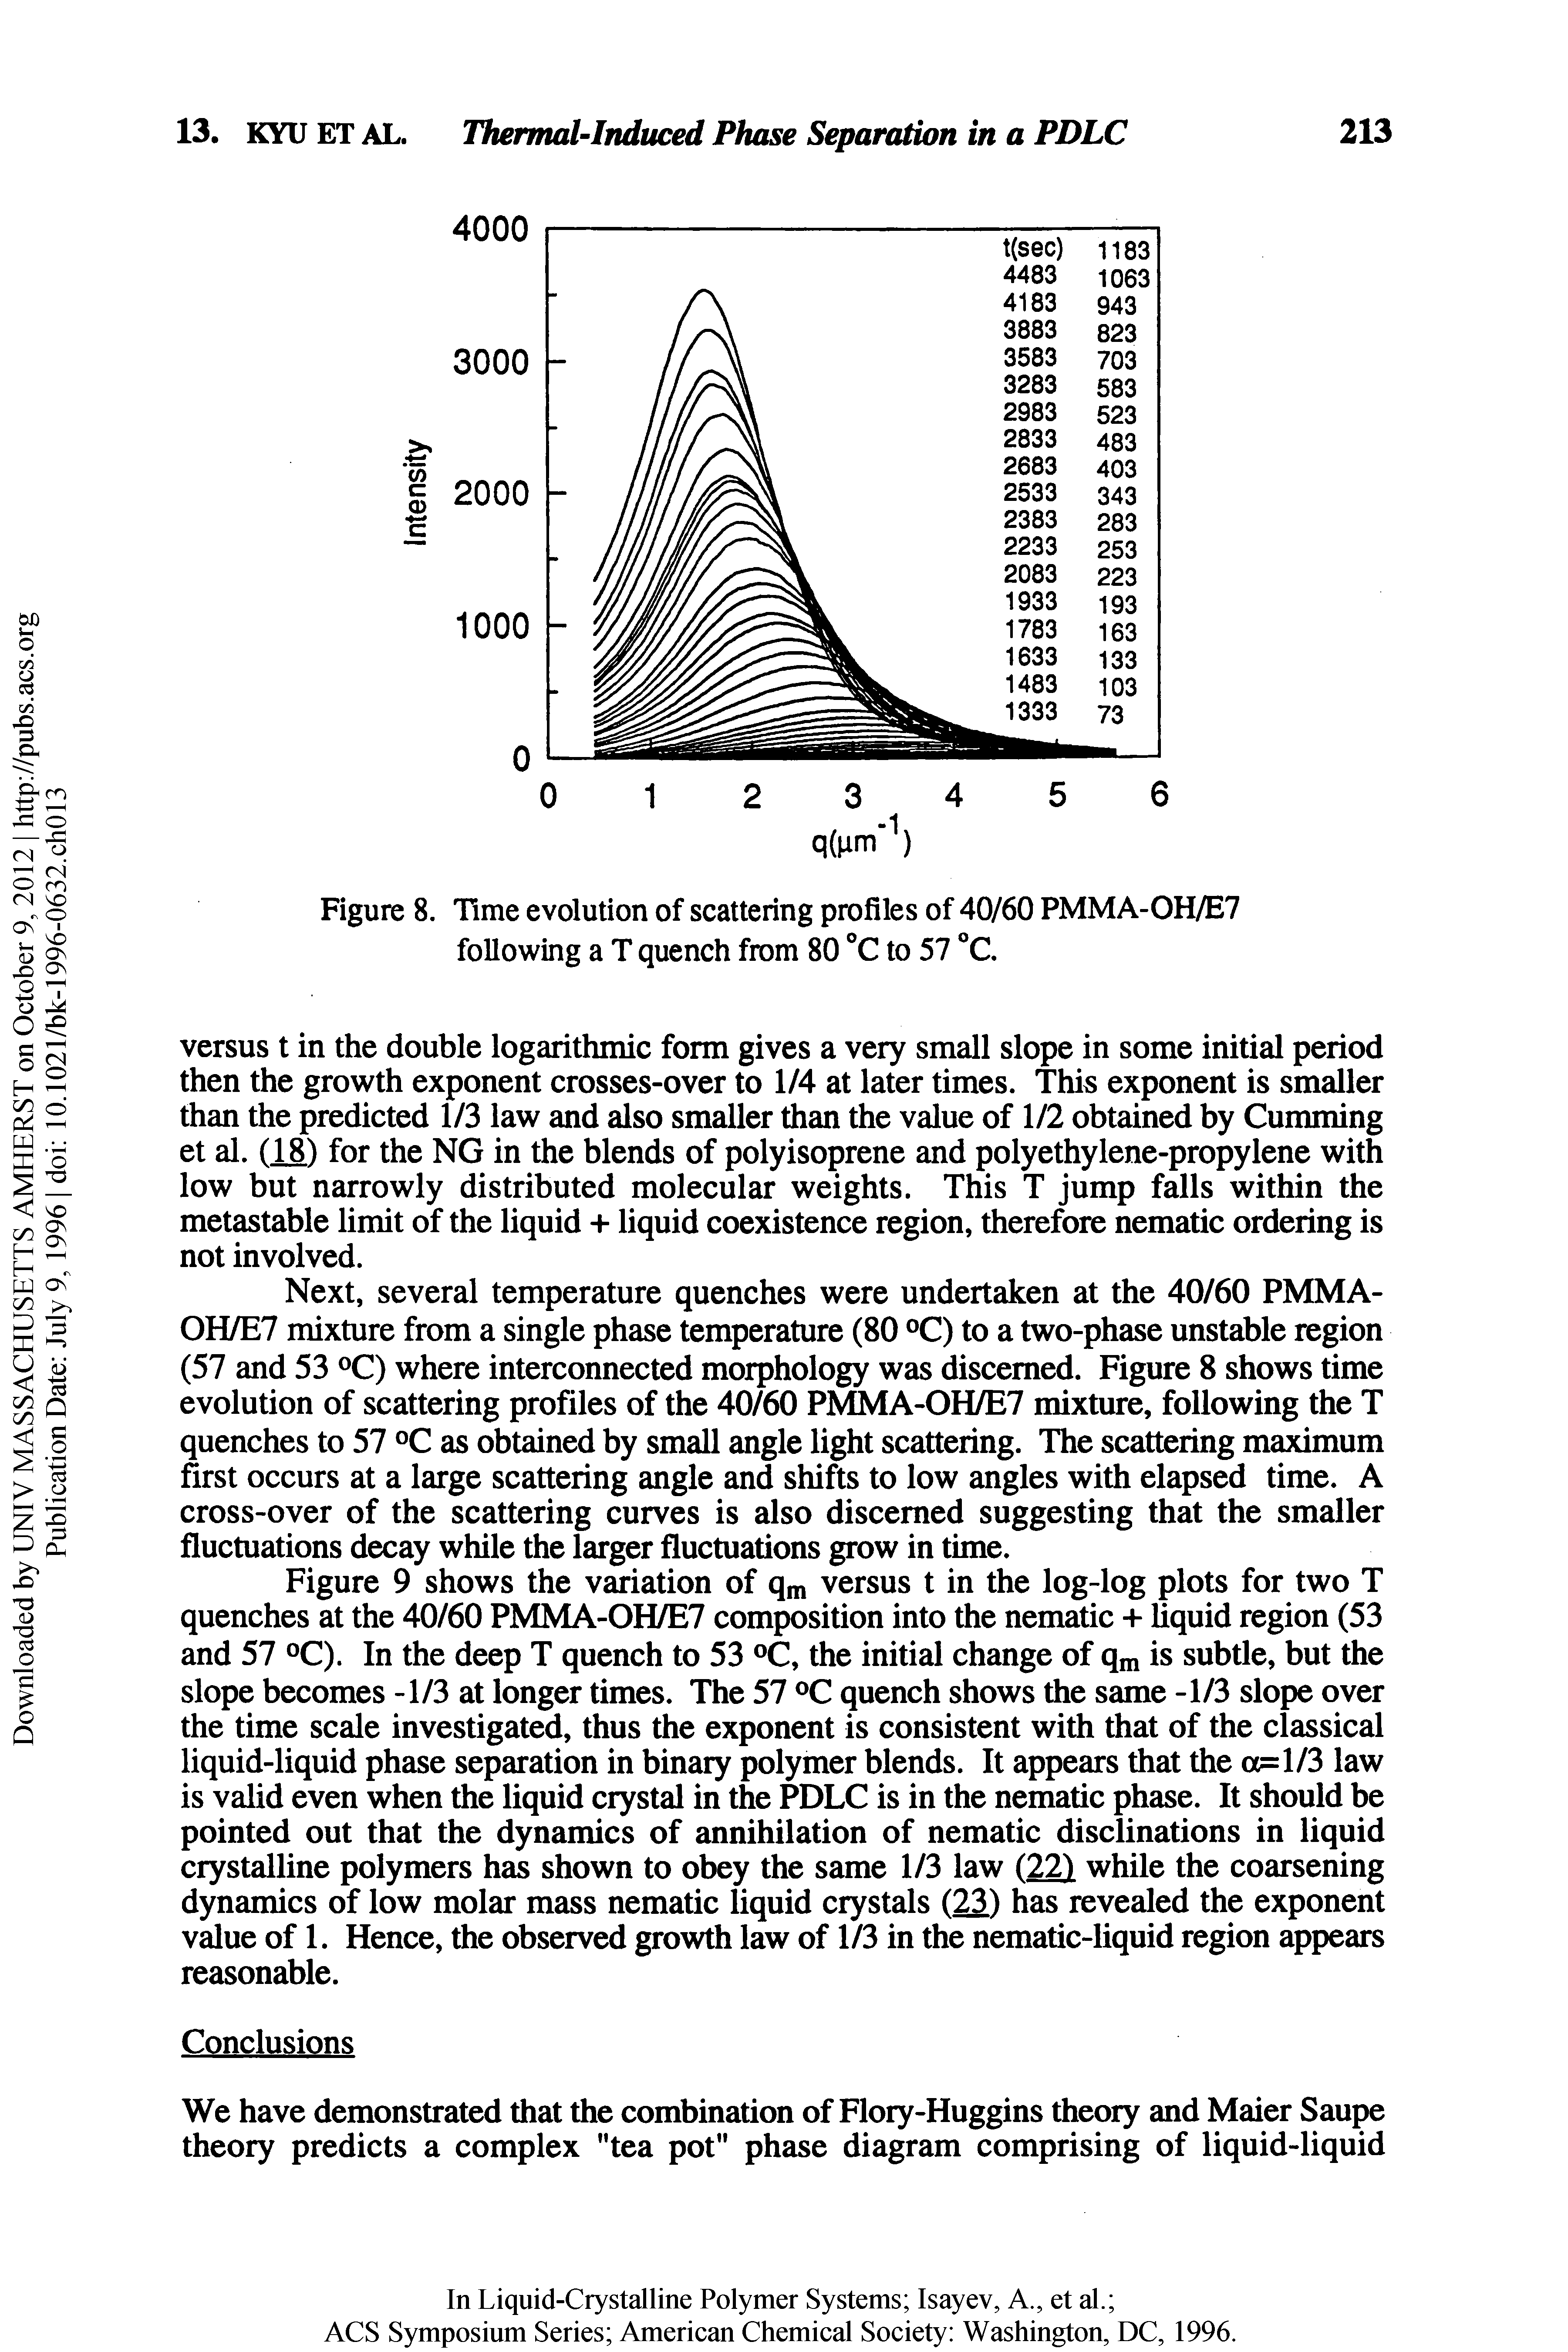 Figure 8. Time evolution of scattering profiles of 40/60 PMMA-OH/E7 following a T quench from 80 °C to 57 C.